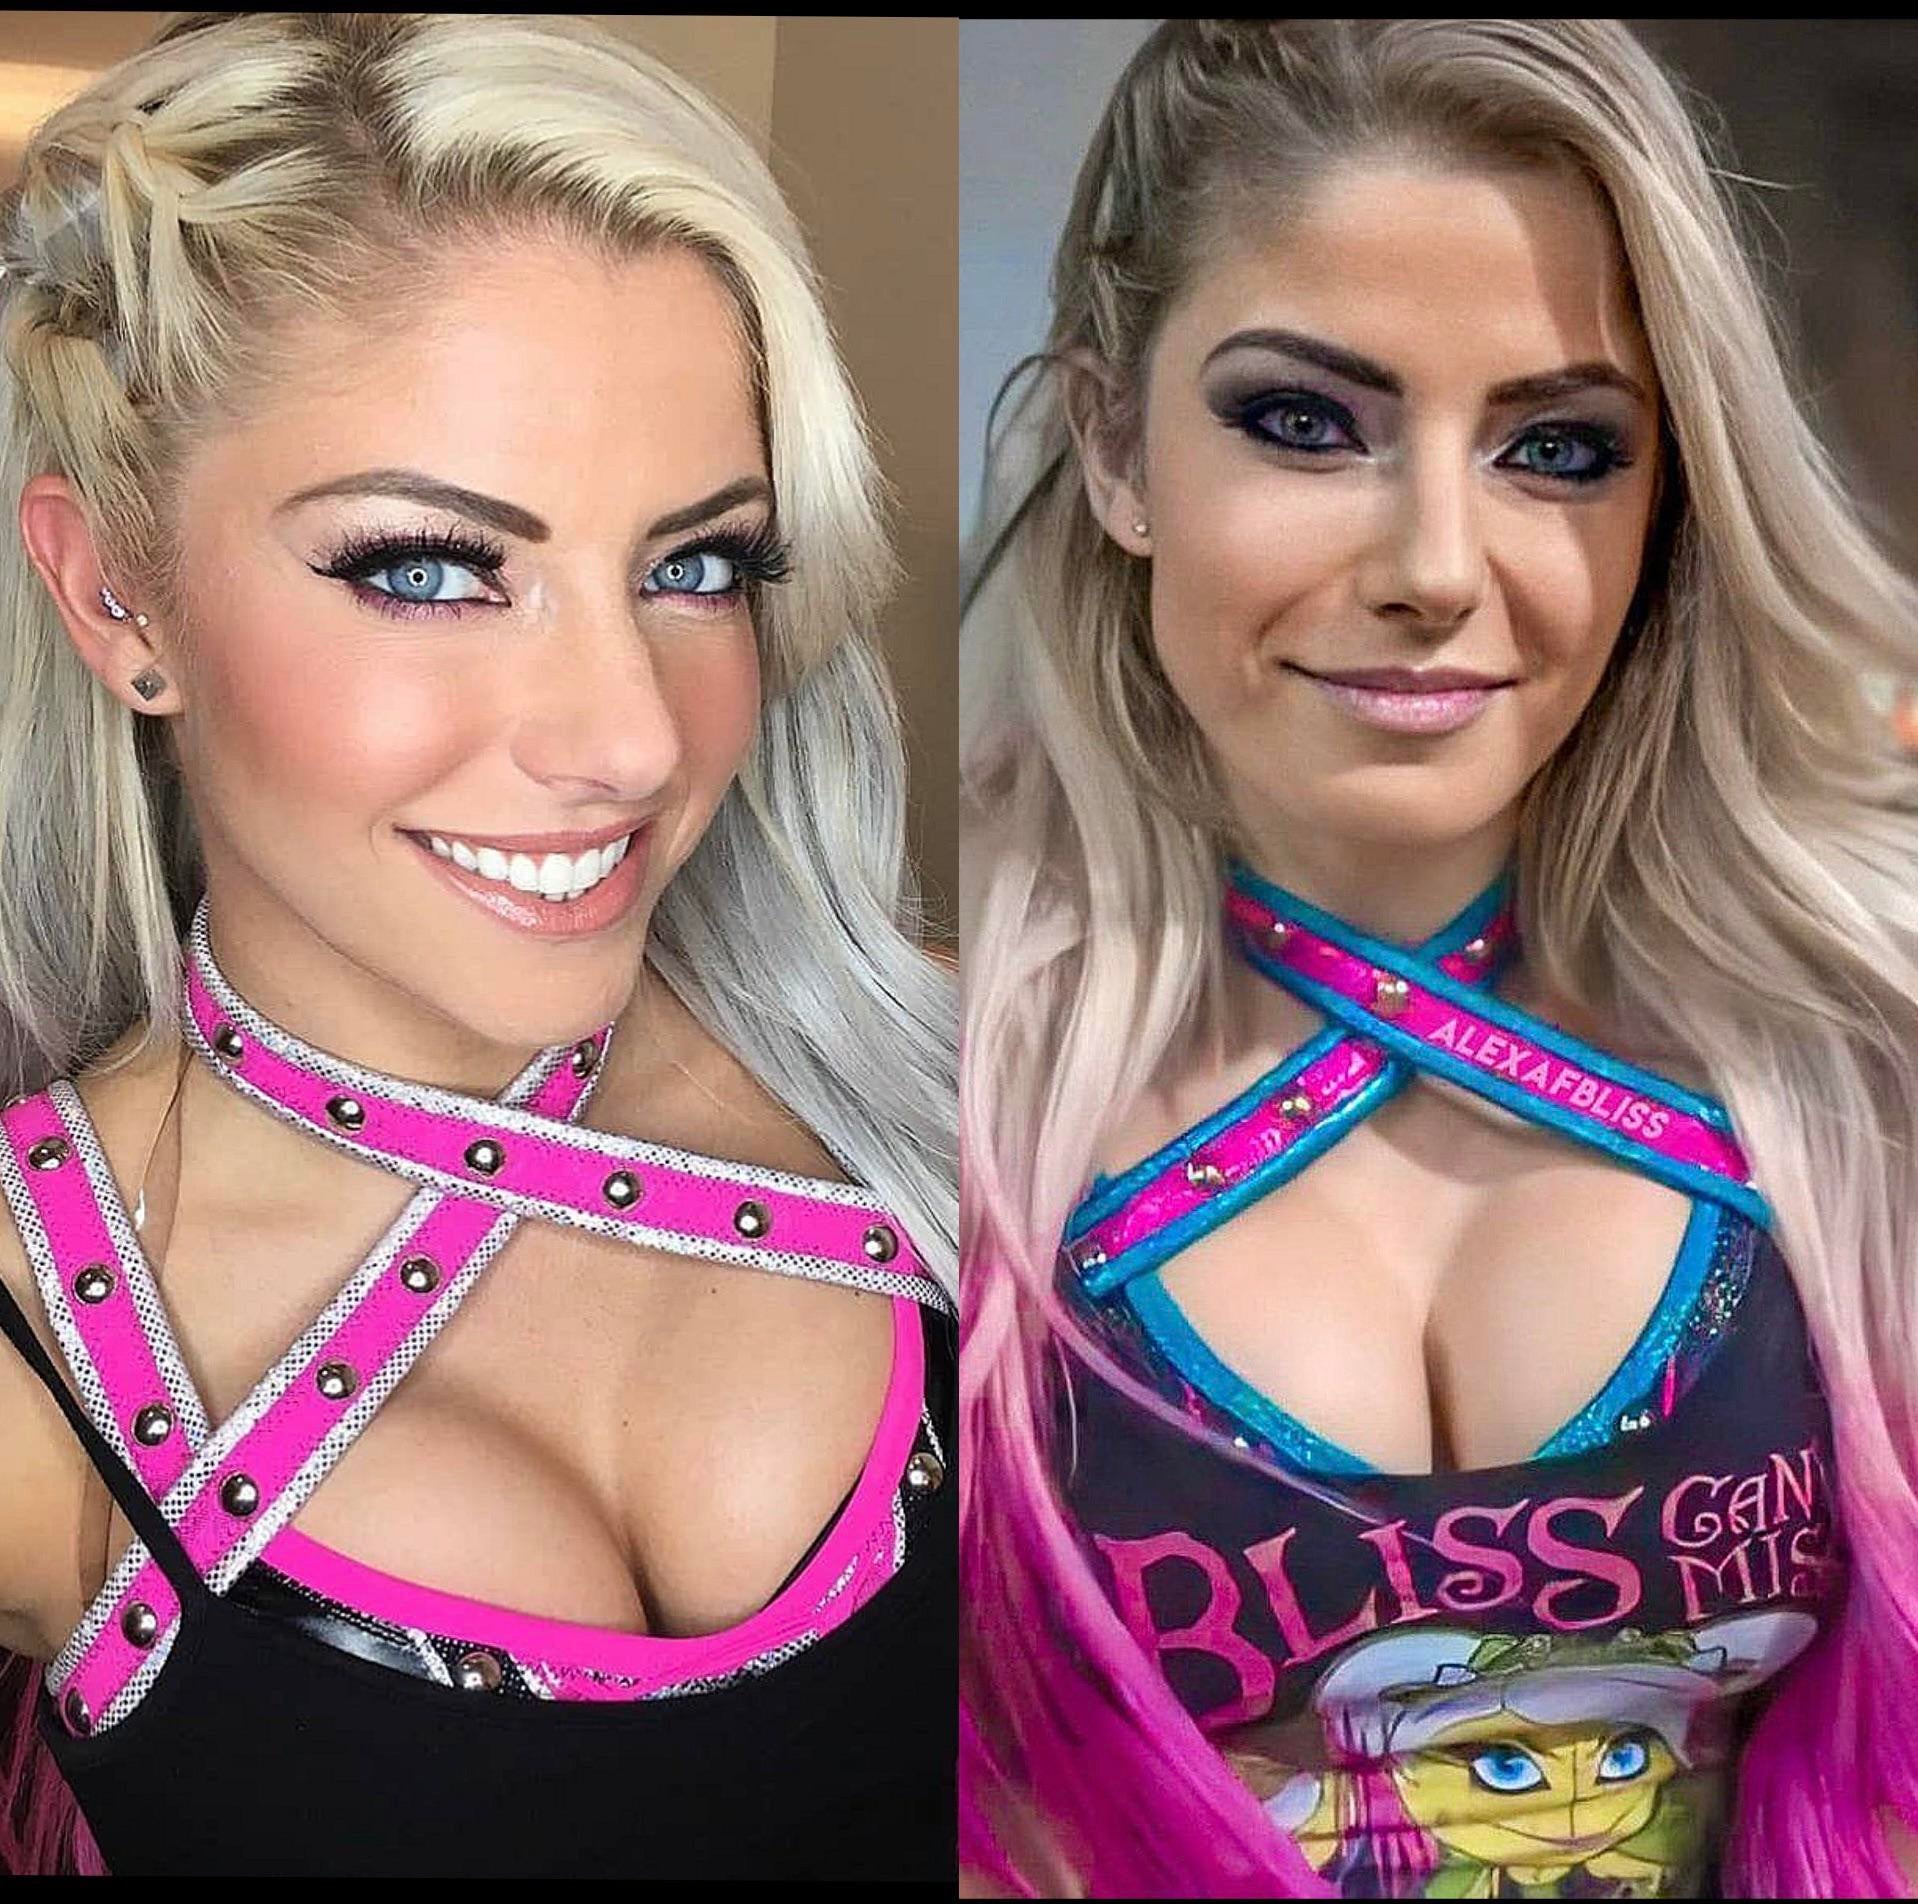 Cant stop stroking my cock for Alexa Bliss